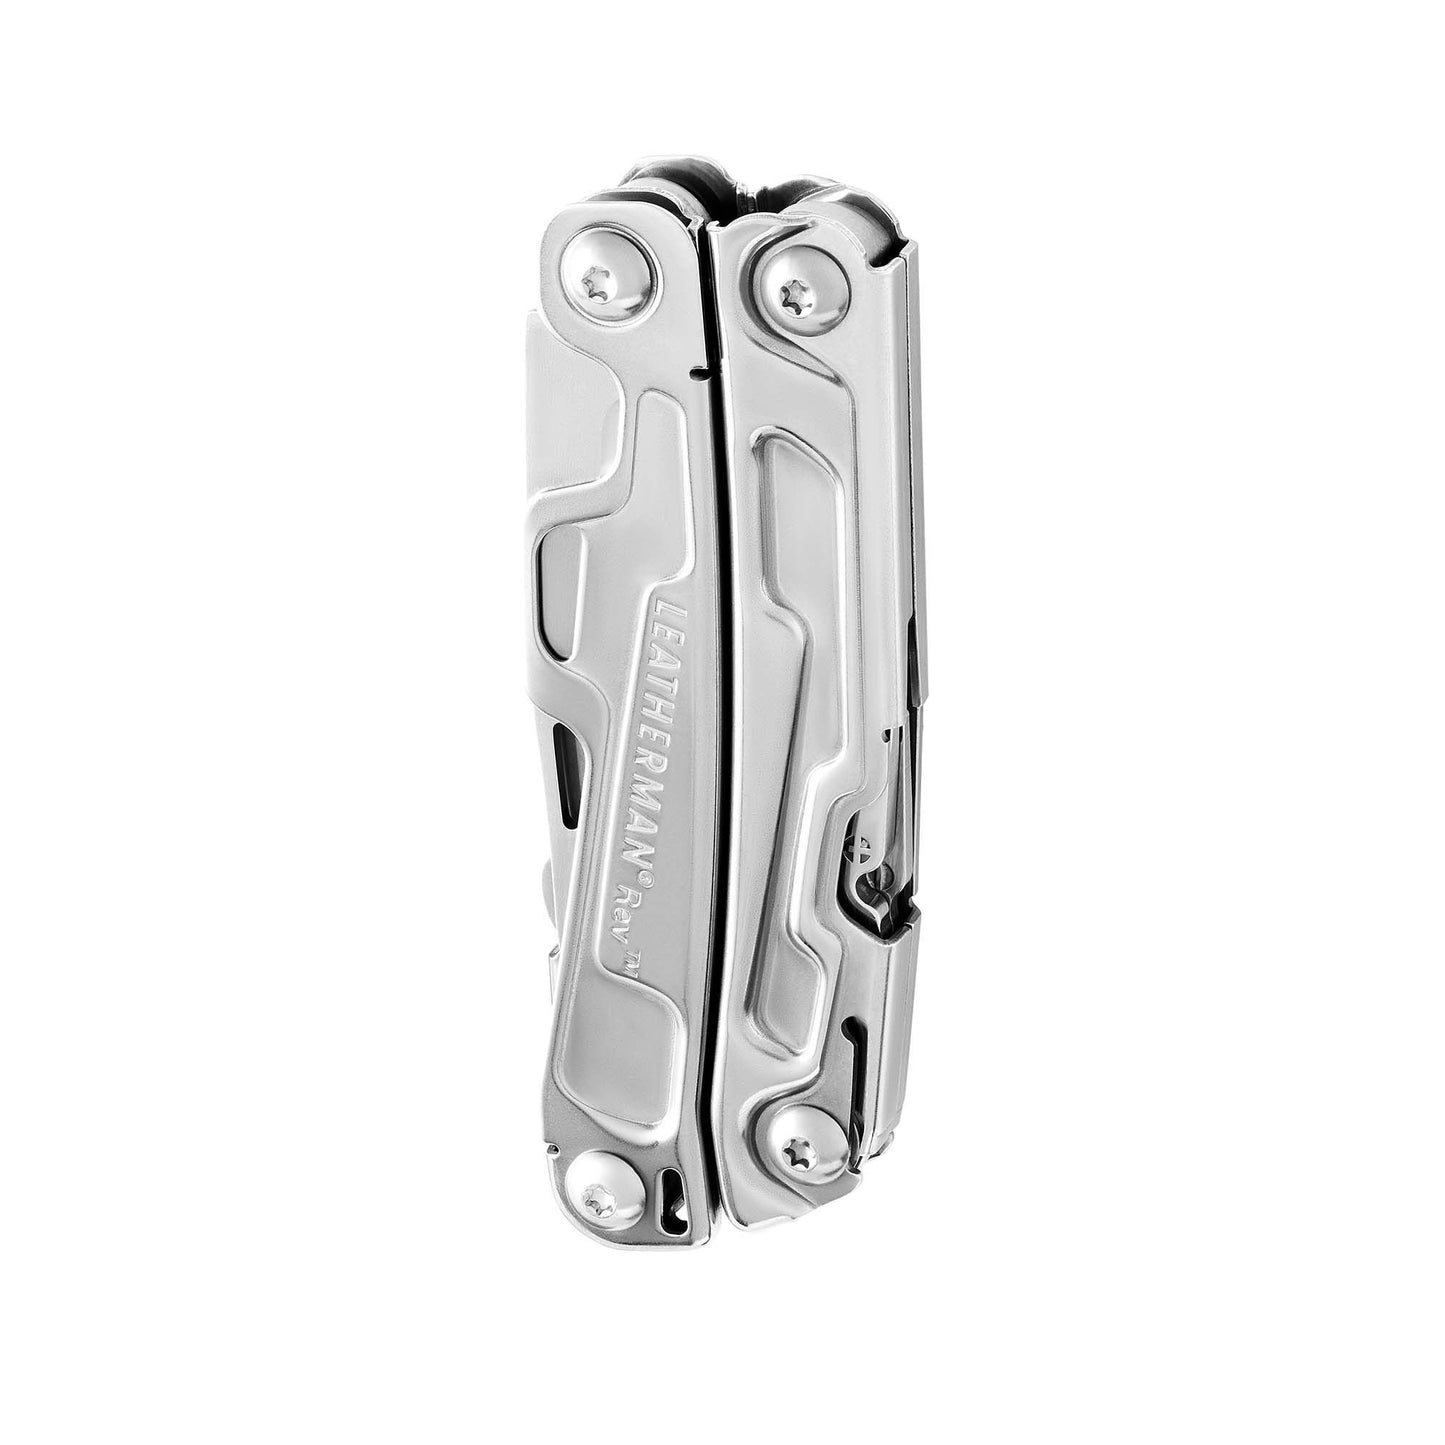 Leatherman REV - No Pouch included